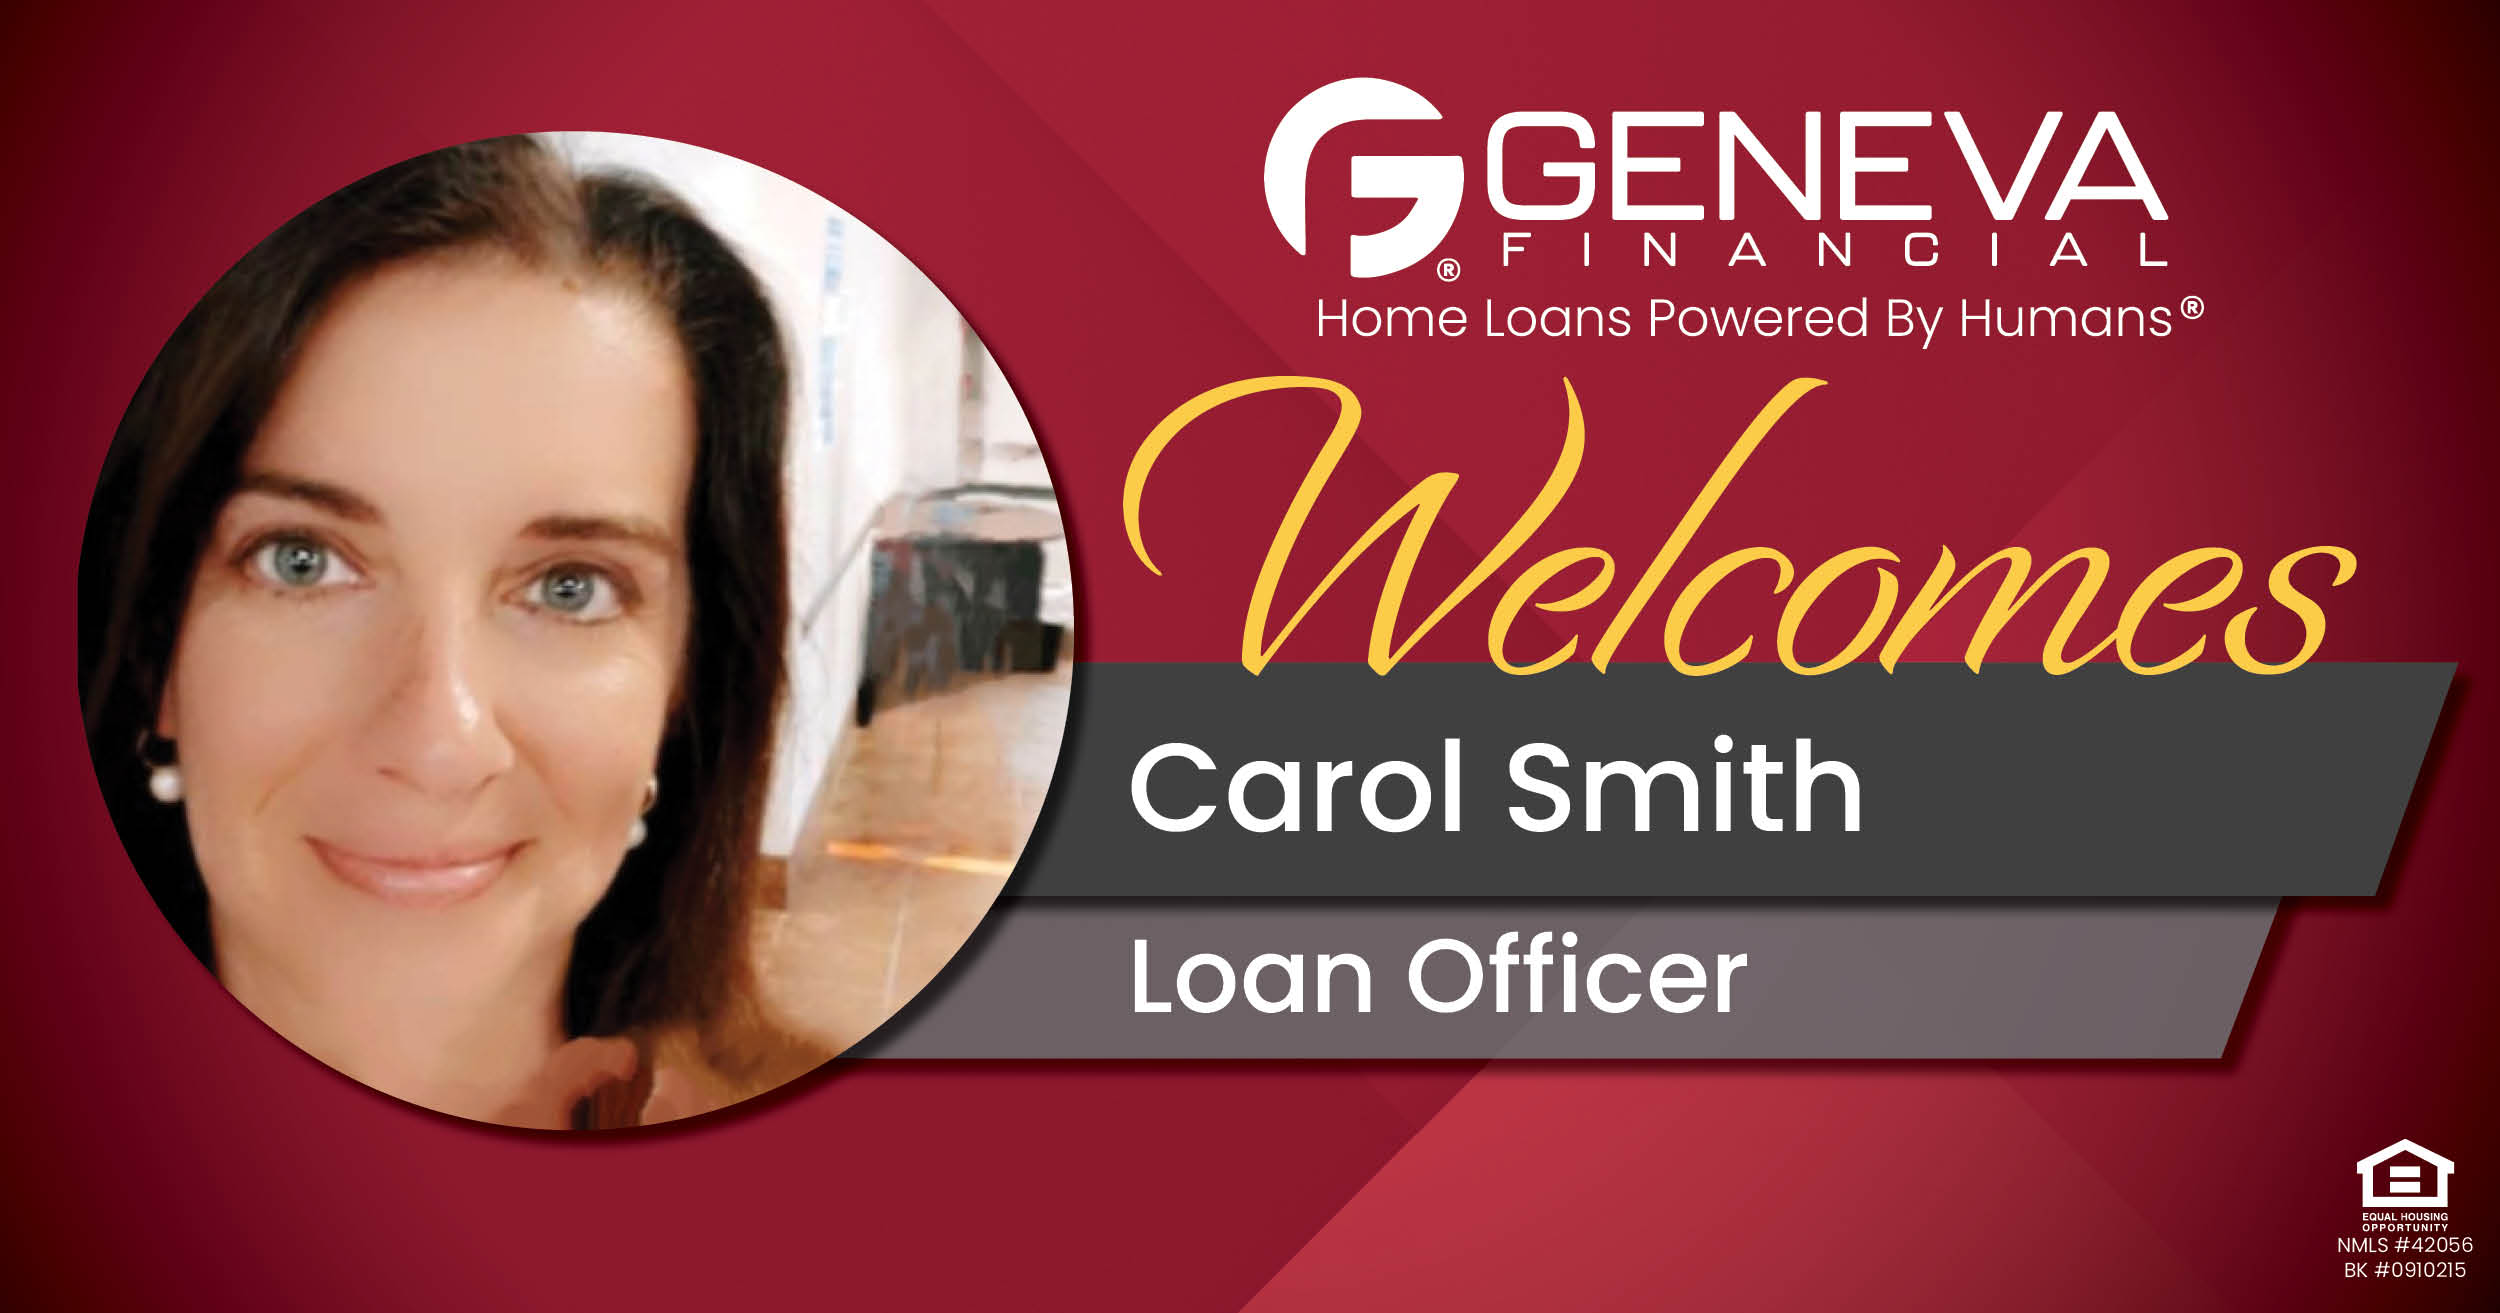 Geneva Financial Welcomes New Loan Officer Carol Smith to Kentucky Market – Home Loans Powered by Humans®.